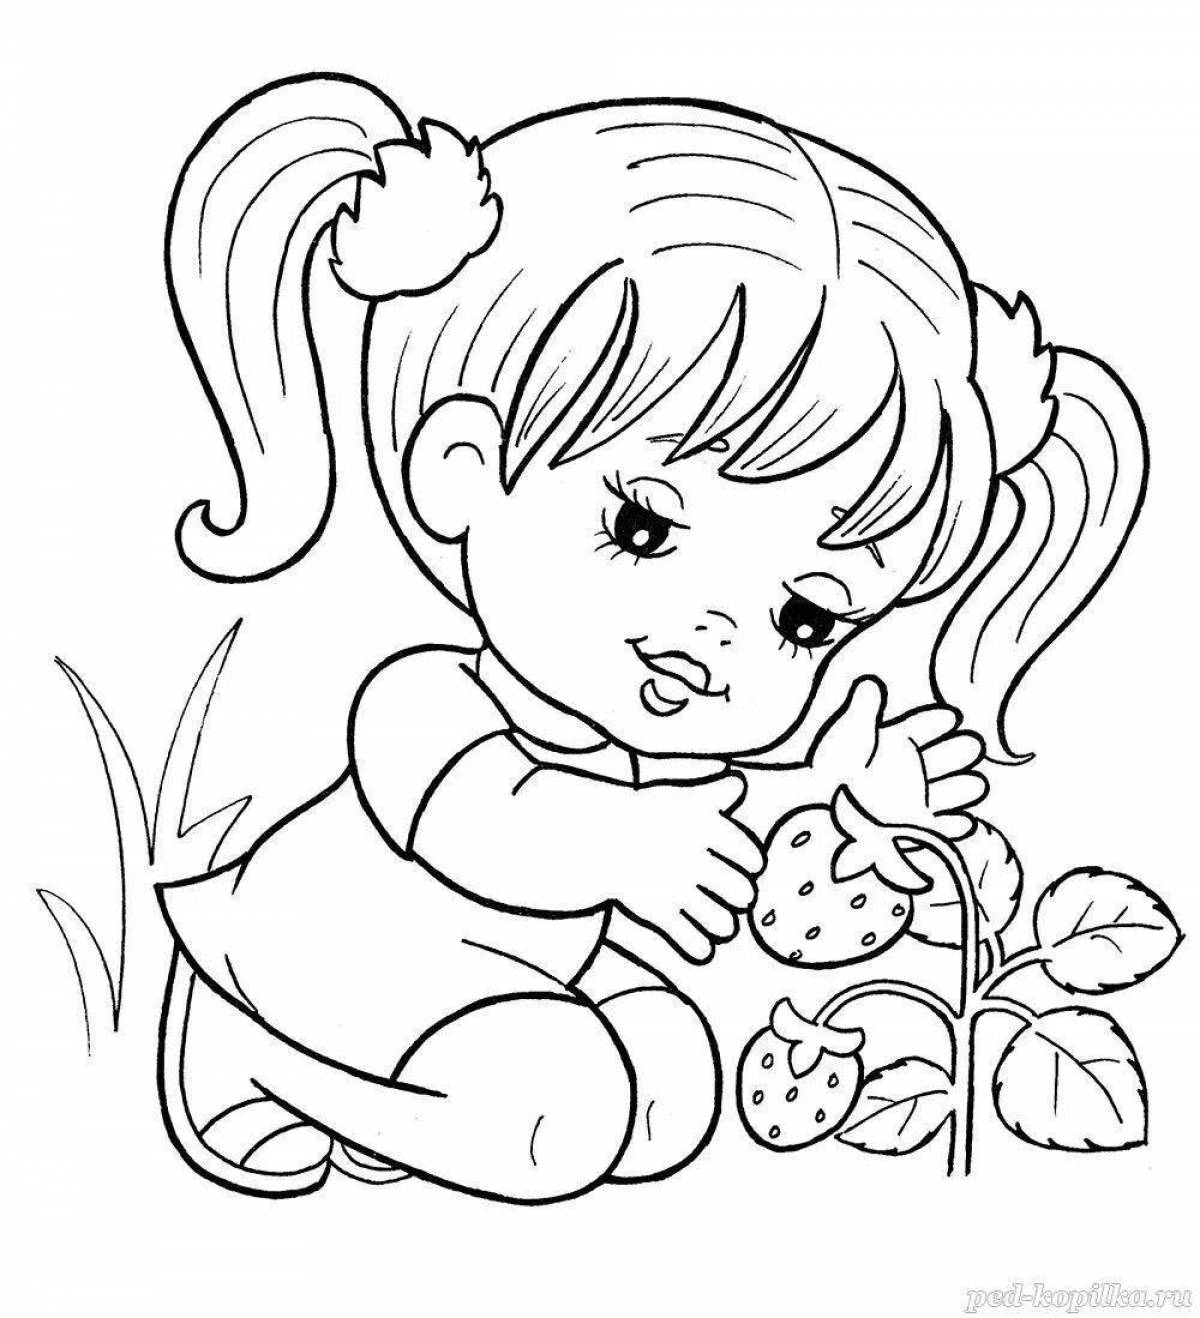 Coloring pages happy child download